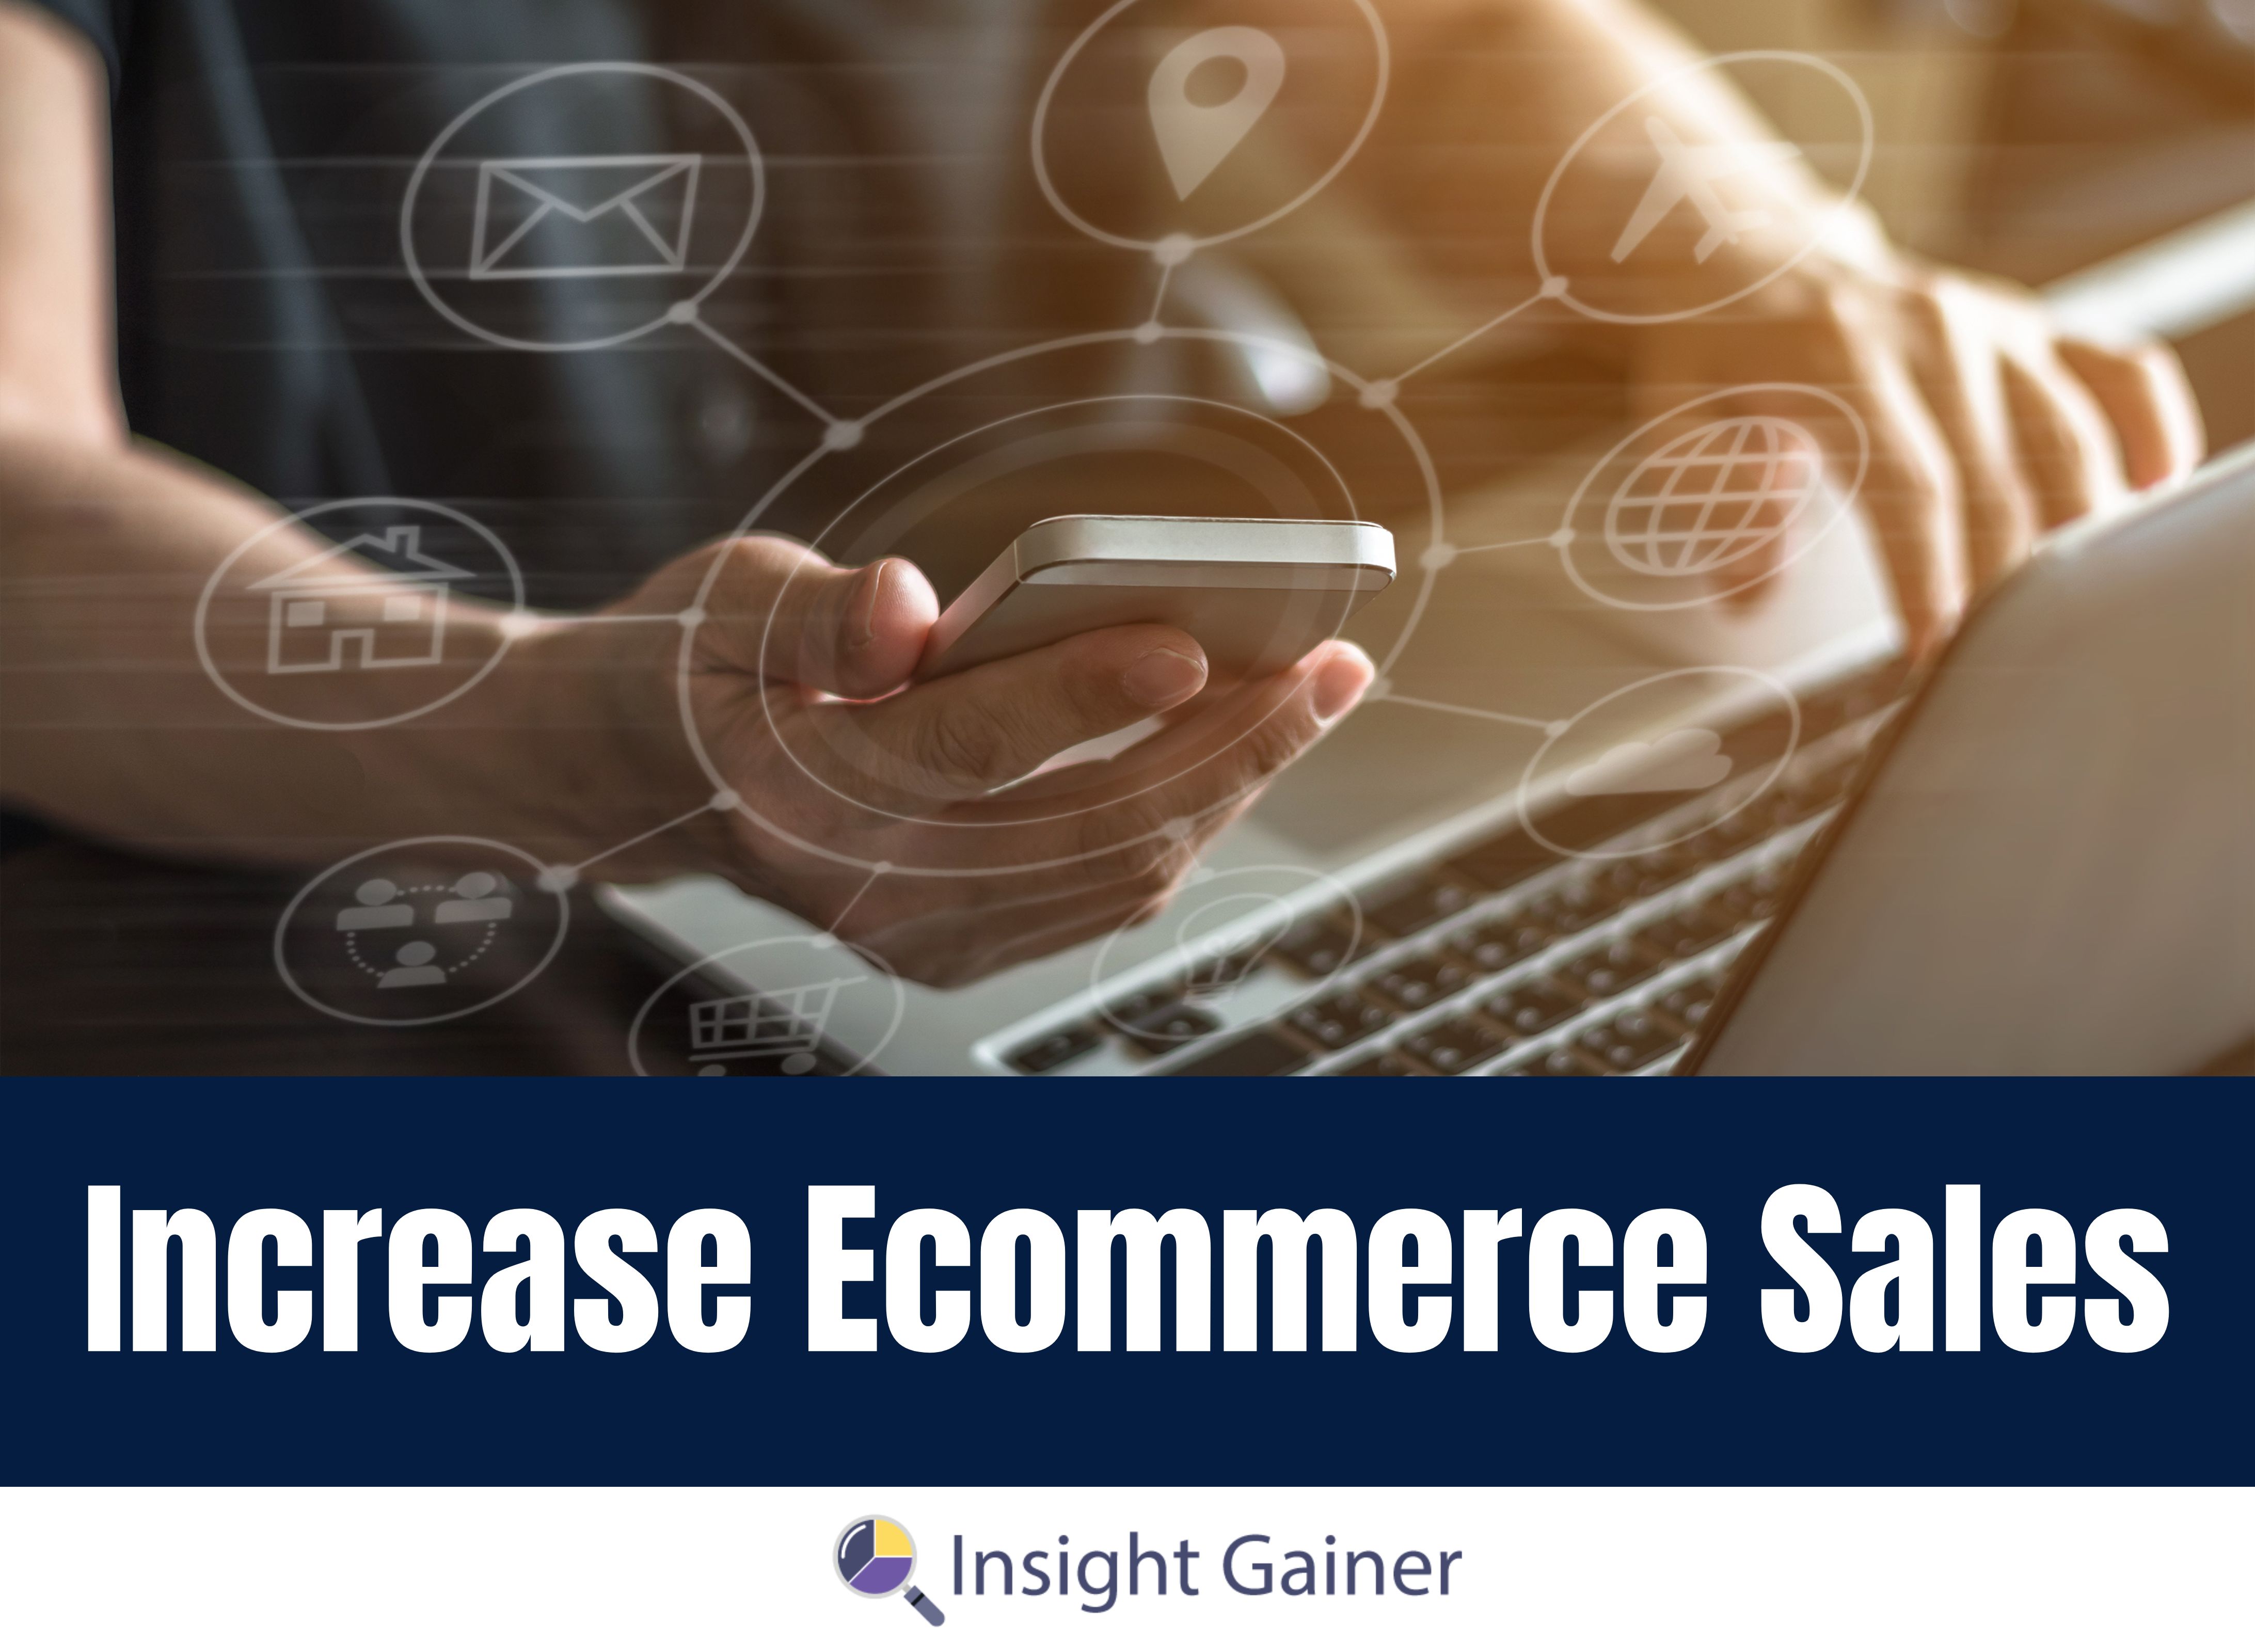 Ecommerce Sales, Insight Gainer